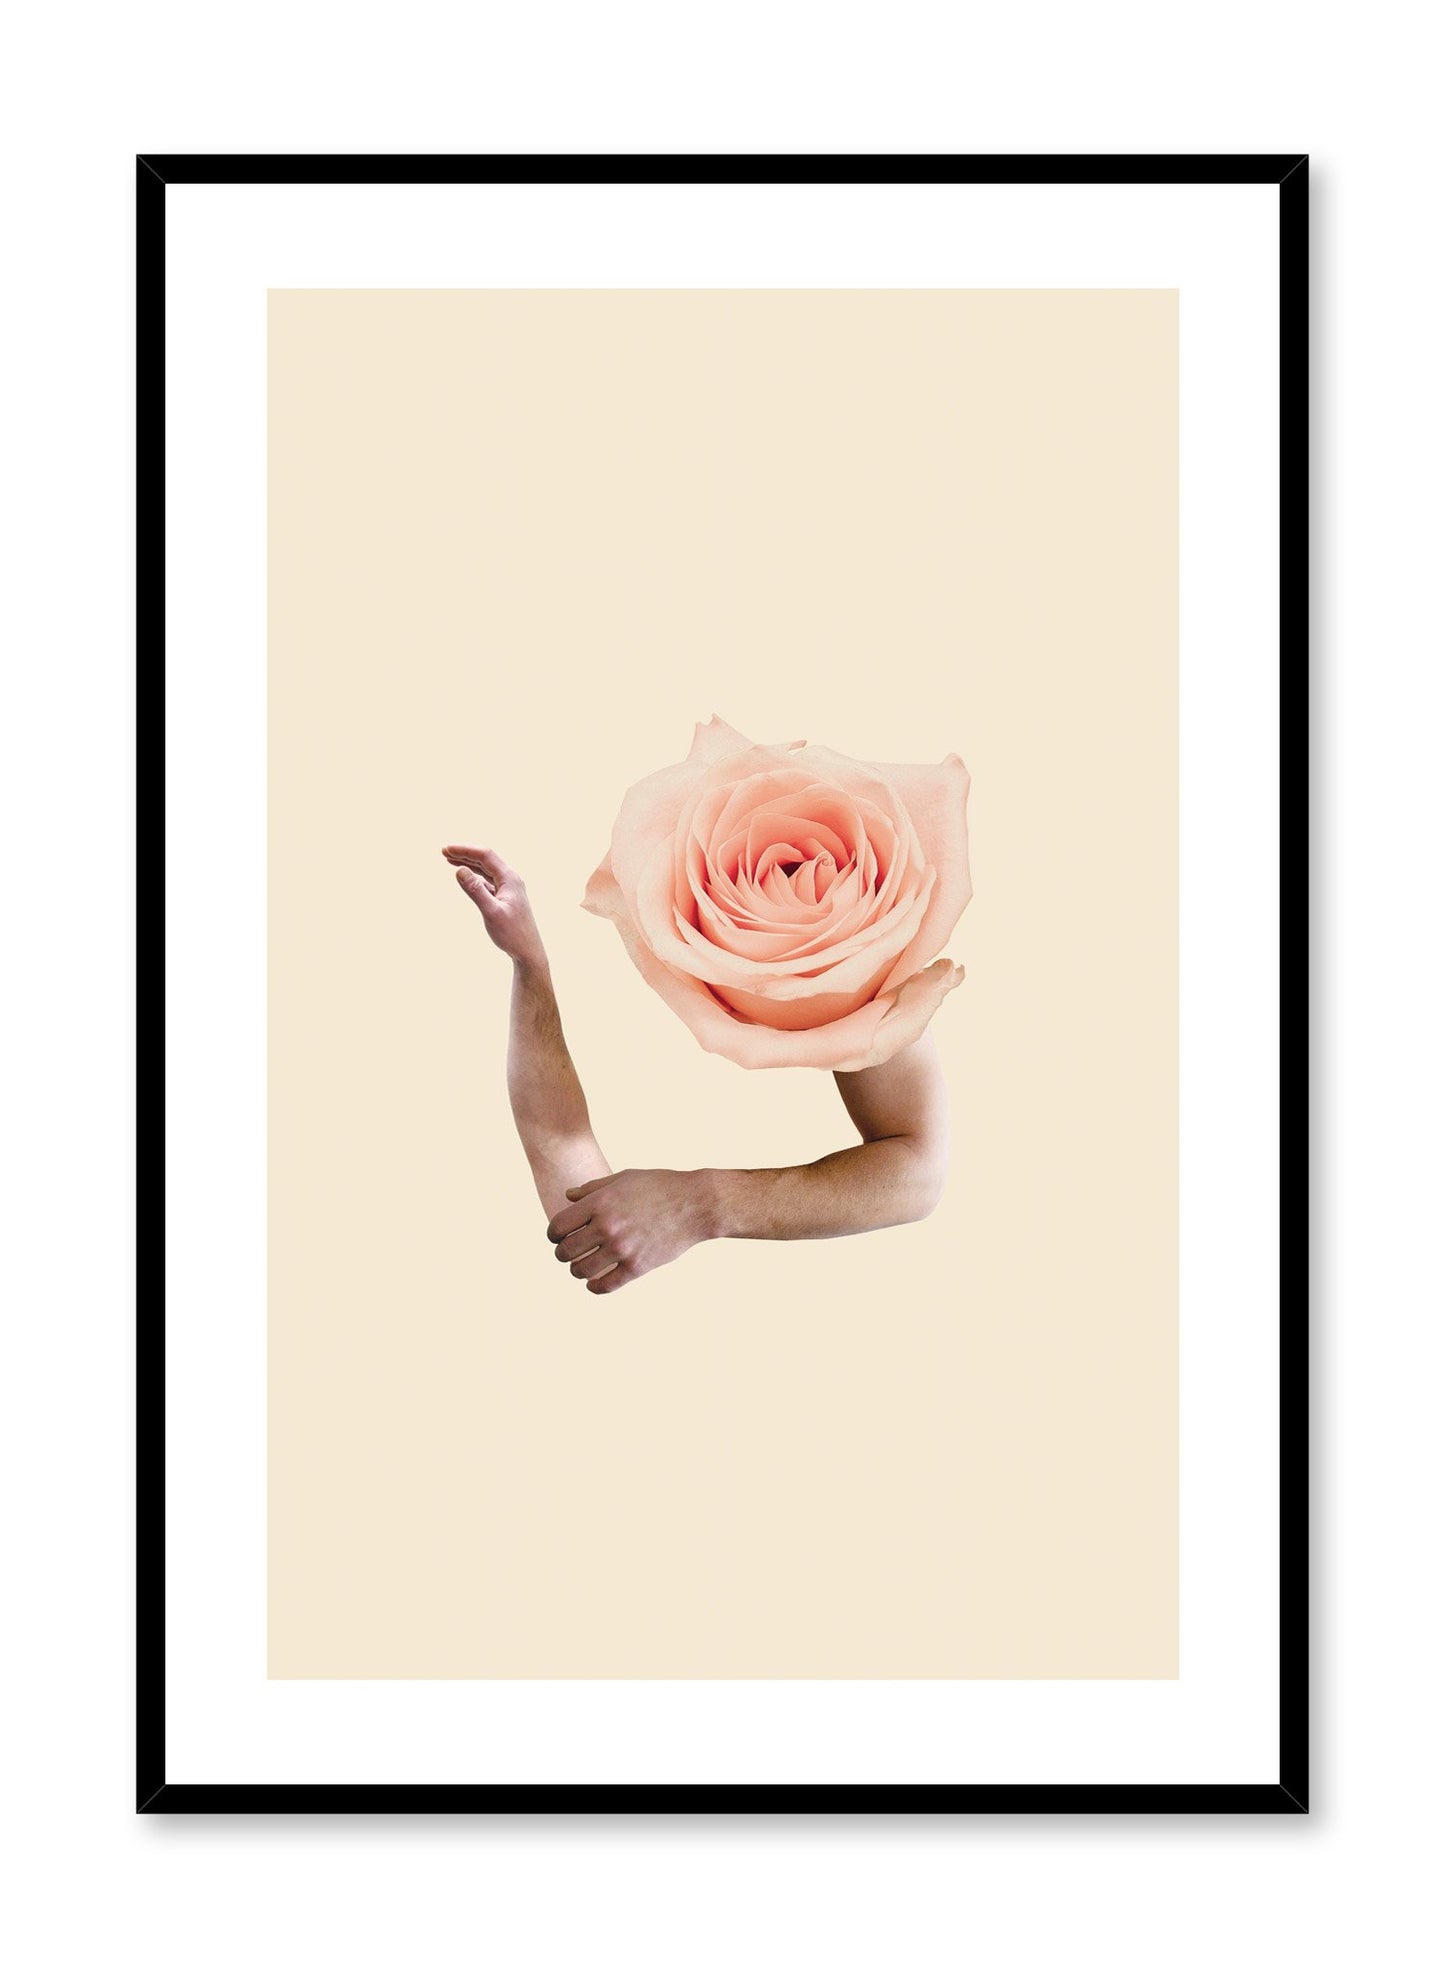 "Open Arms" is a minimalist beige and light pink collage poster by Opposite Wall of cutout arms and a baby pink rose layered over a beige background. 